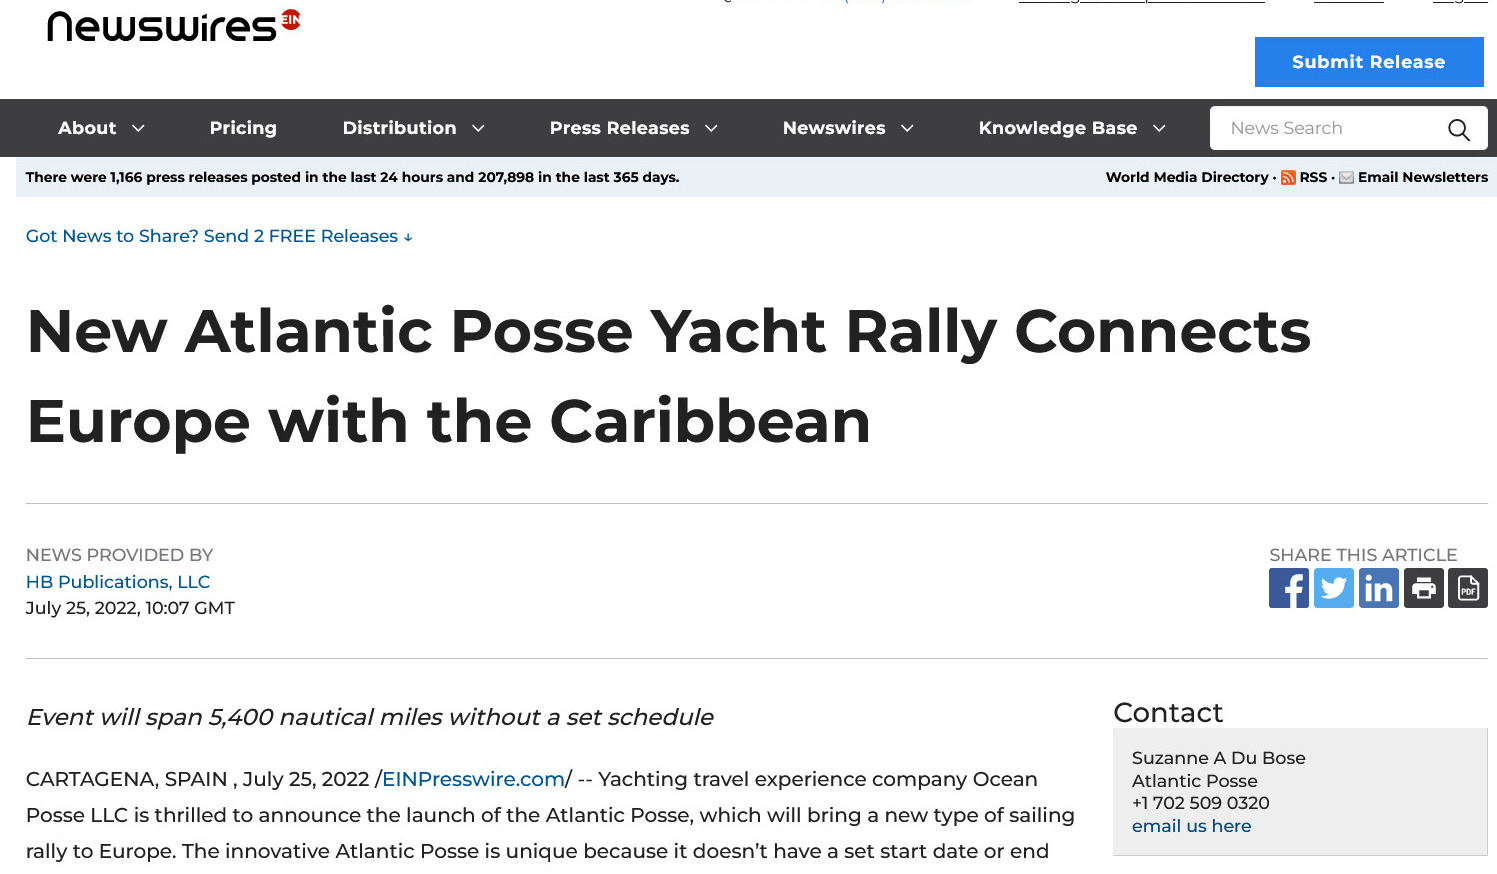 https://www.stkittsnevisentertainment.com/article/582846270-new-atlantic-posse-yacht-rally-connects-europe-with-the-caribbean